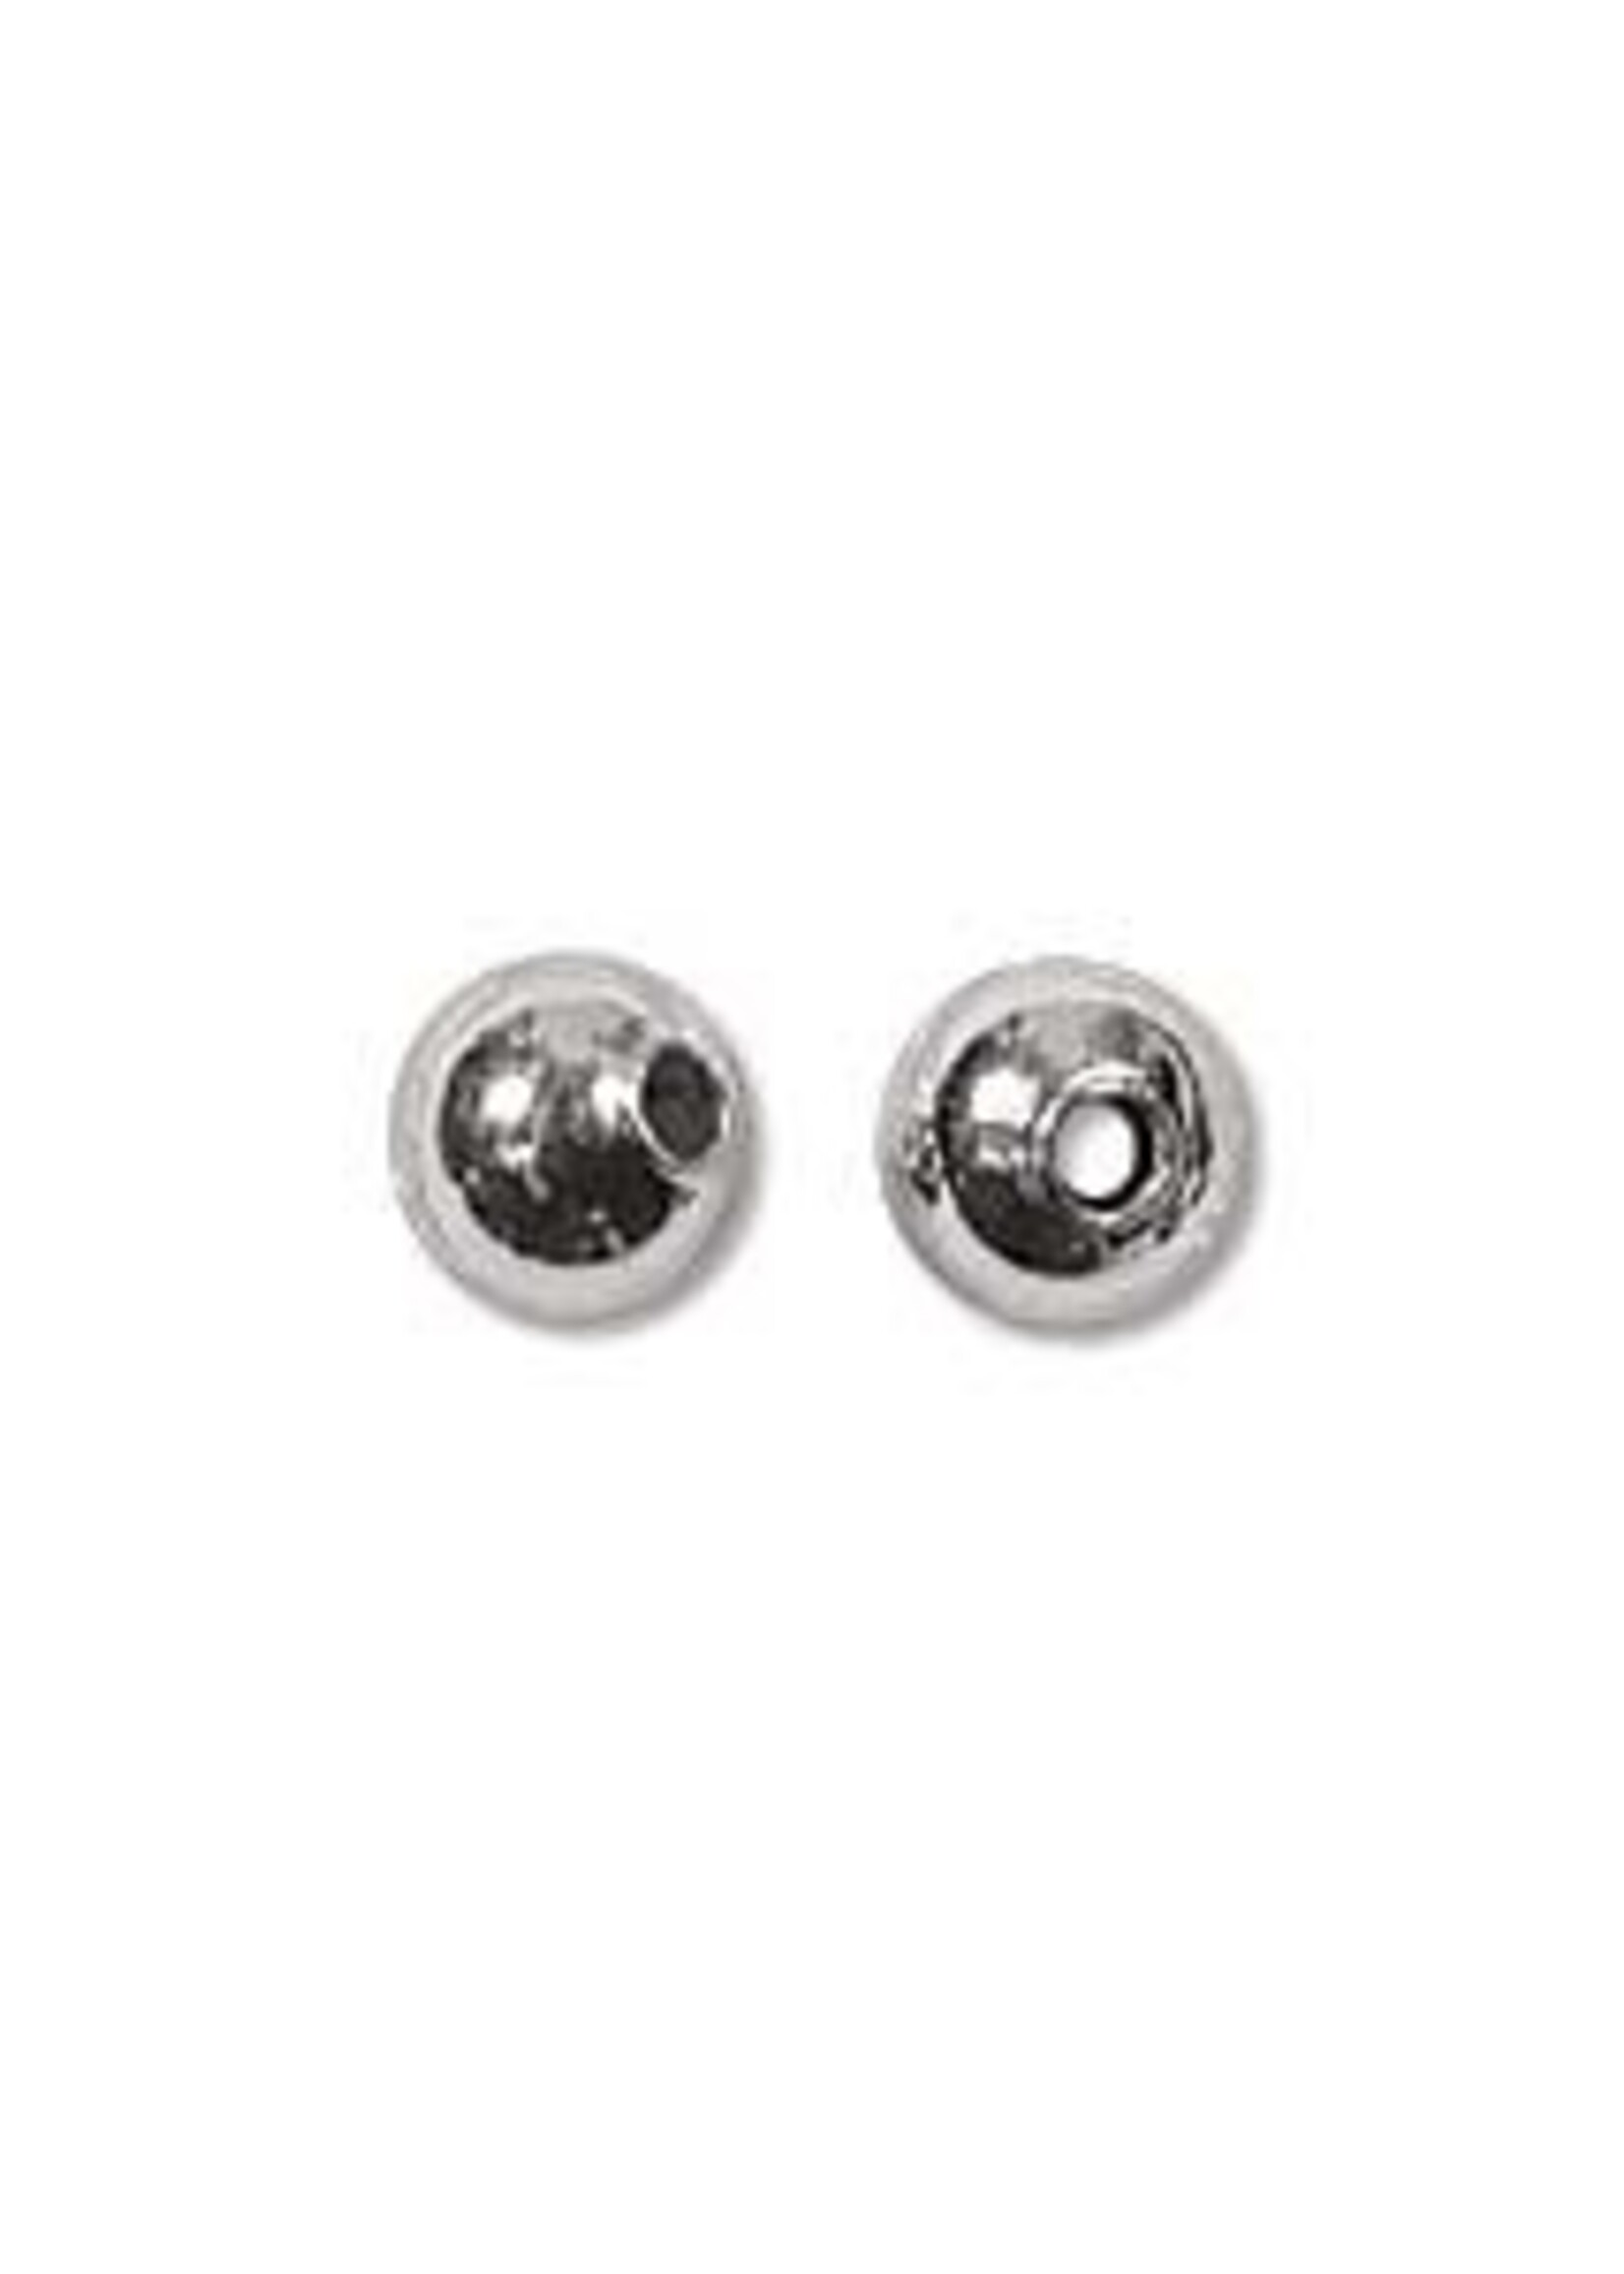 4mm Rounds Silver Plate Qty 144